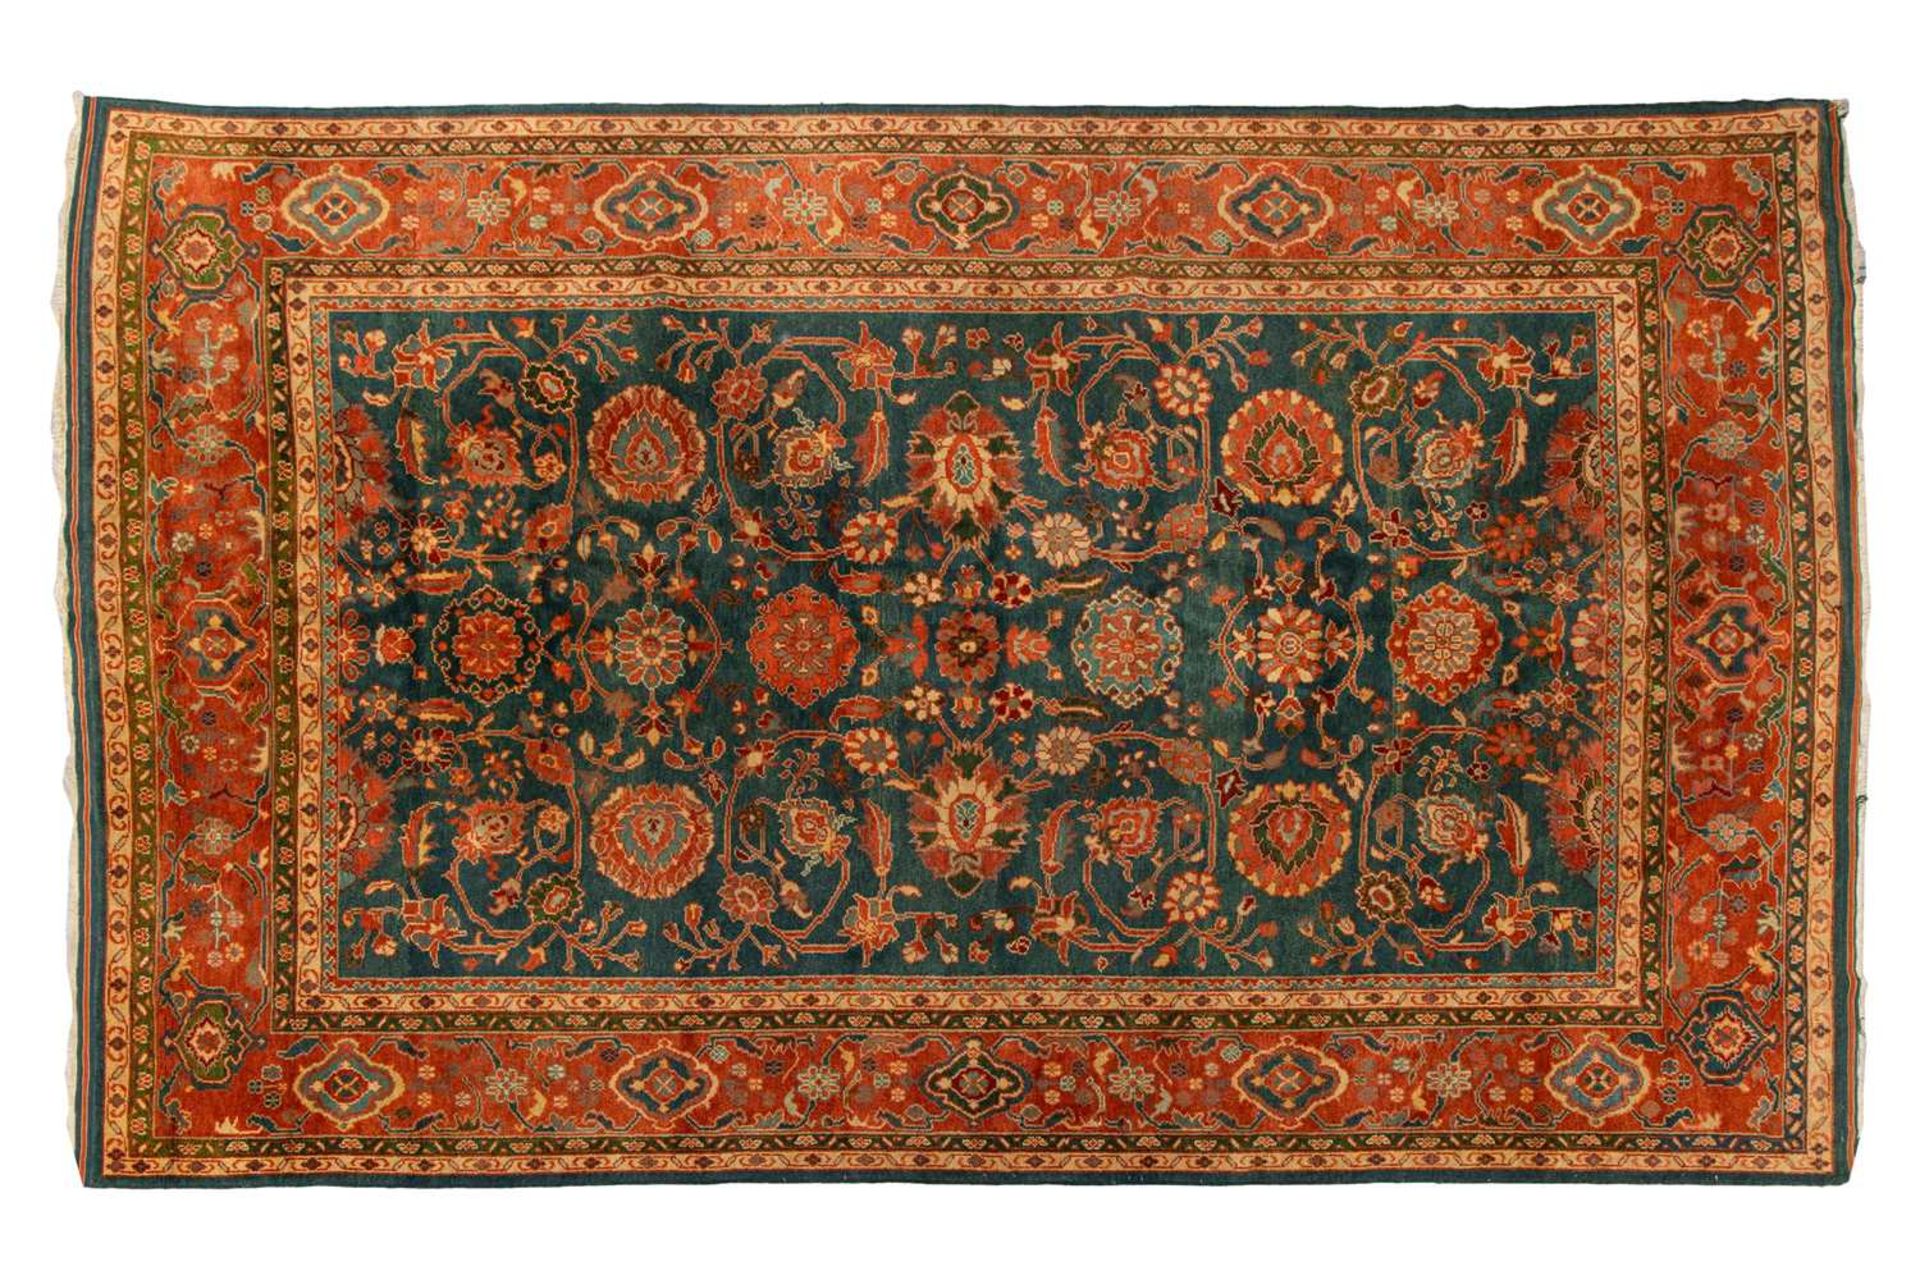 A large Ushak Carpet, the red palmette and leaf design on a blue/green field, within a light red bor